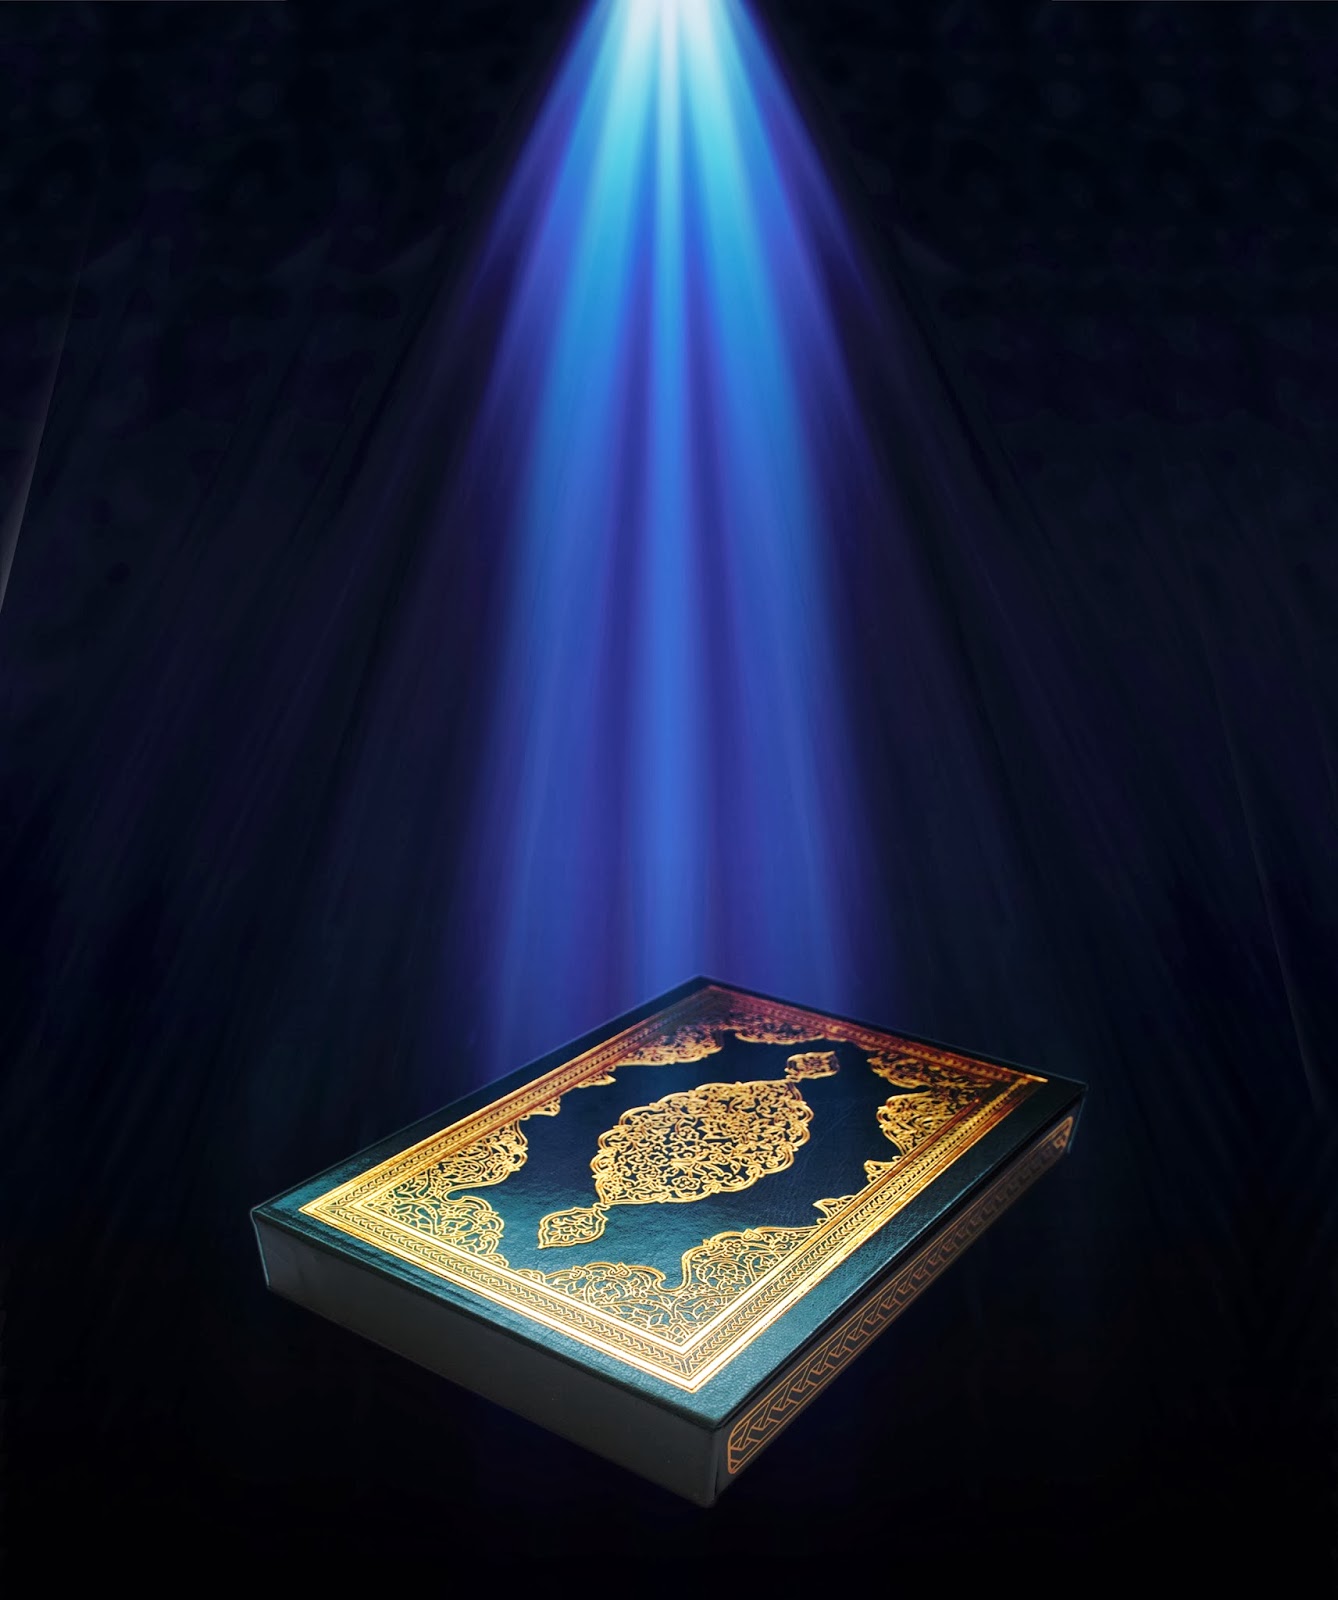 The University of Guilan condemns the desecration of the Holy Qur'an in Sweden